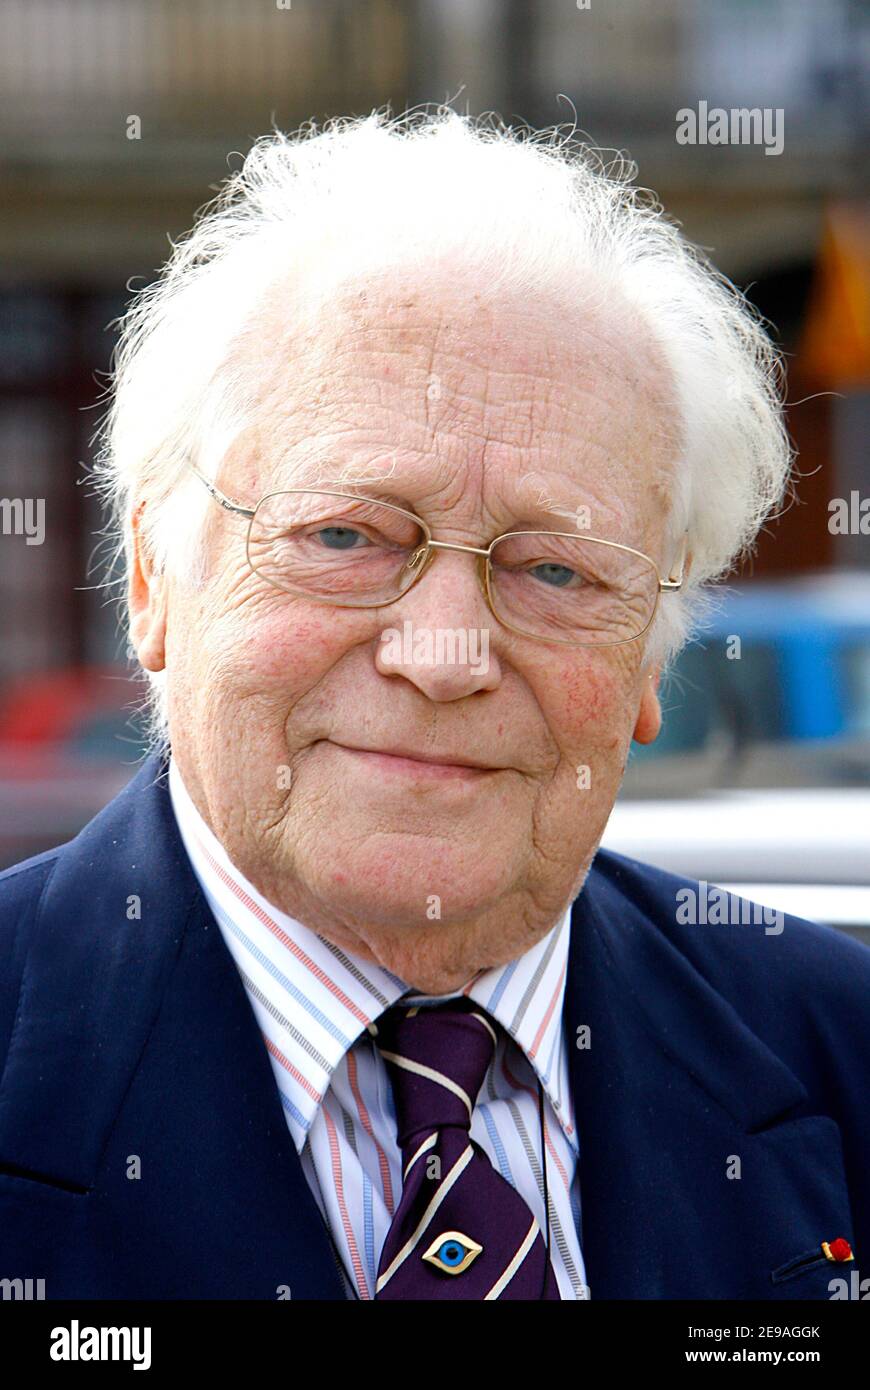 French writer Maurice Druon arrives in Bordeaux, France on May 27, 2006. Druon, a World War II veteran, is the Secretary of 'Academie Francaise', a Goncourt Prize winner, TV serie and song author, has just published his memoirs. Photo by Patrick Bernard/ABACAPRESS.COM Stock Photo